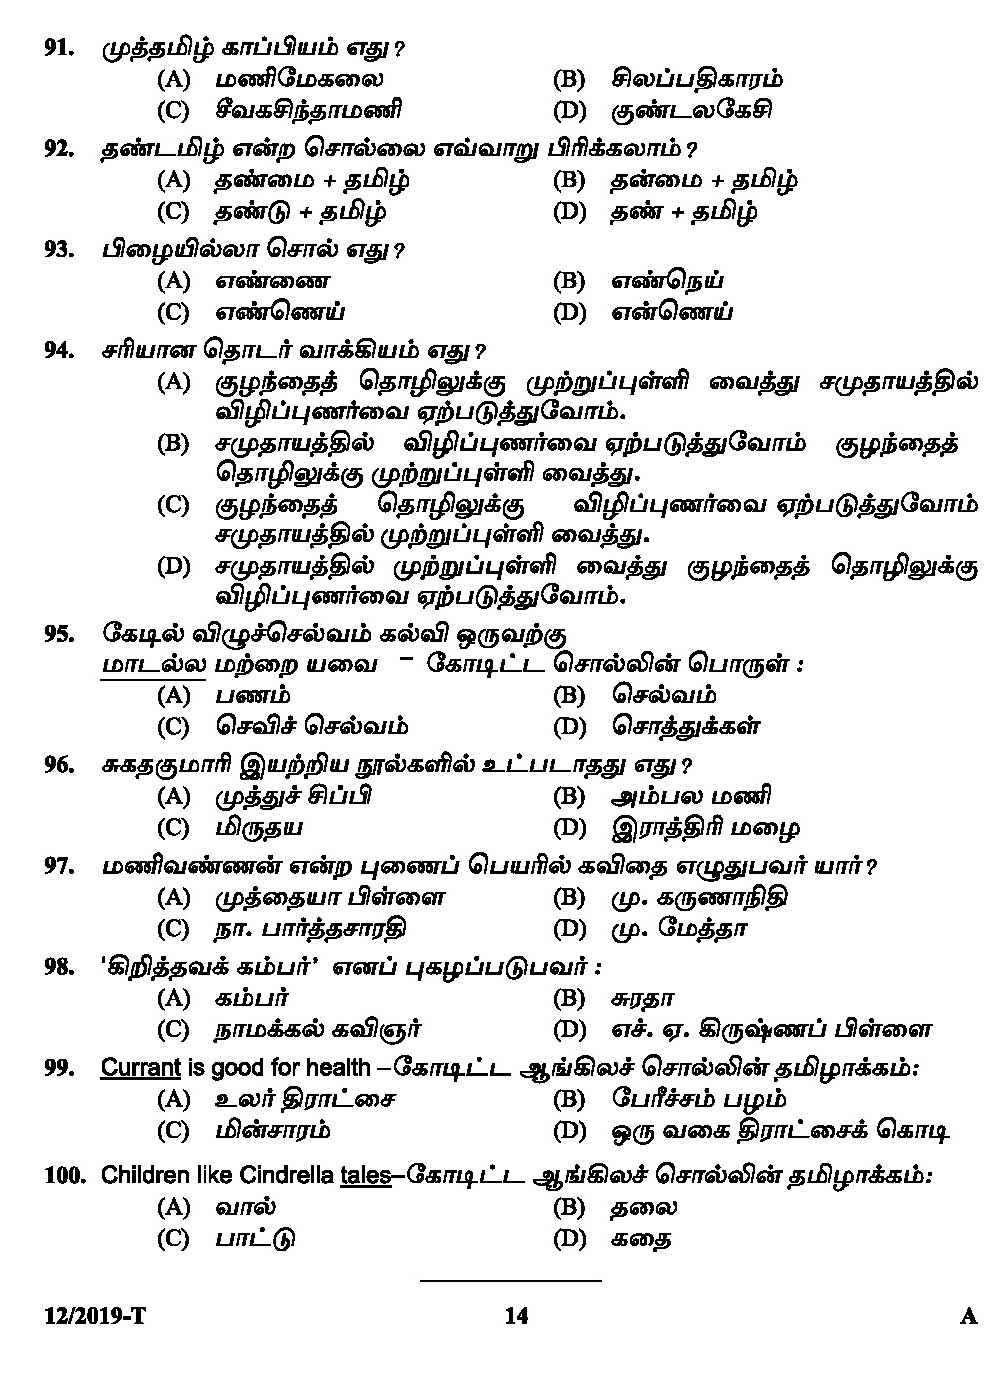 romans bible quiz questions and answers in tamil